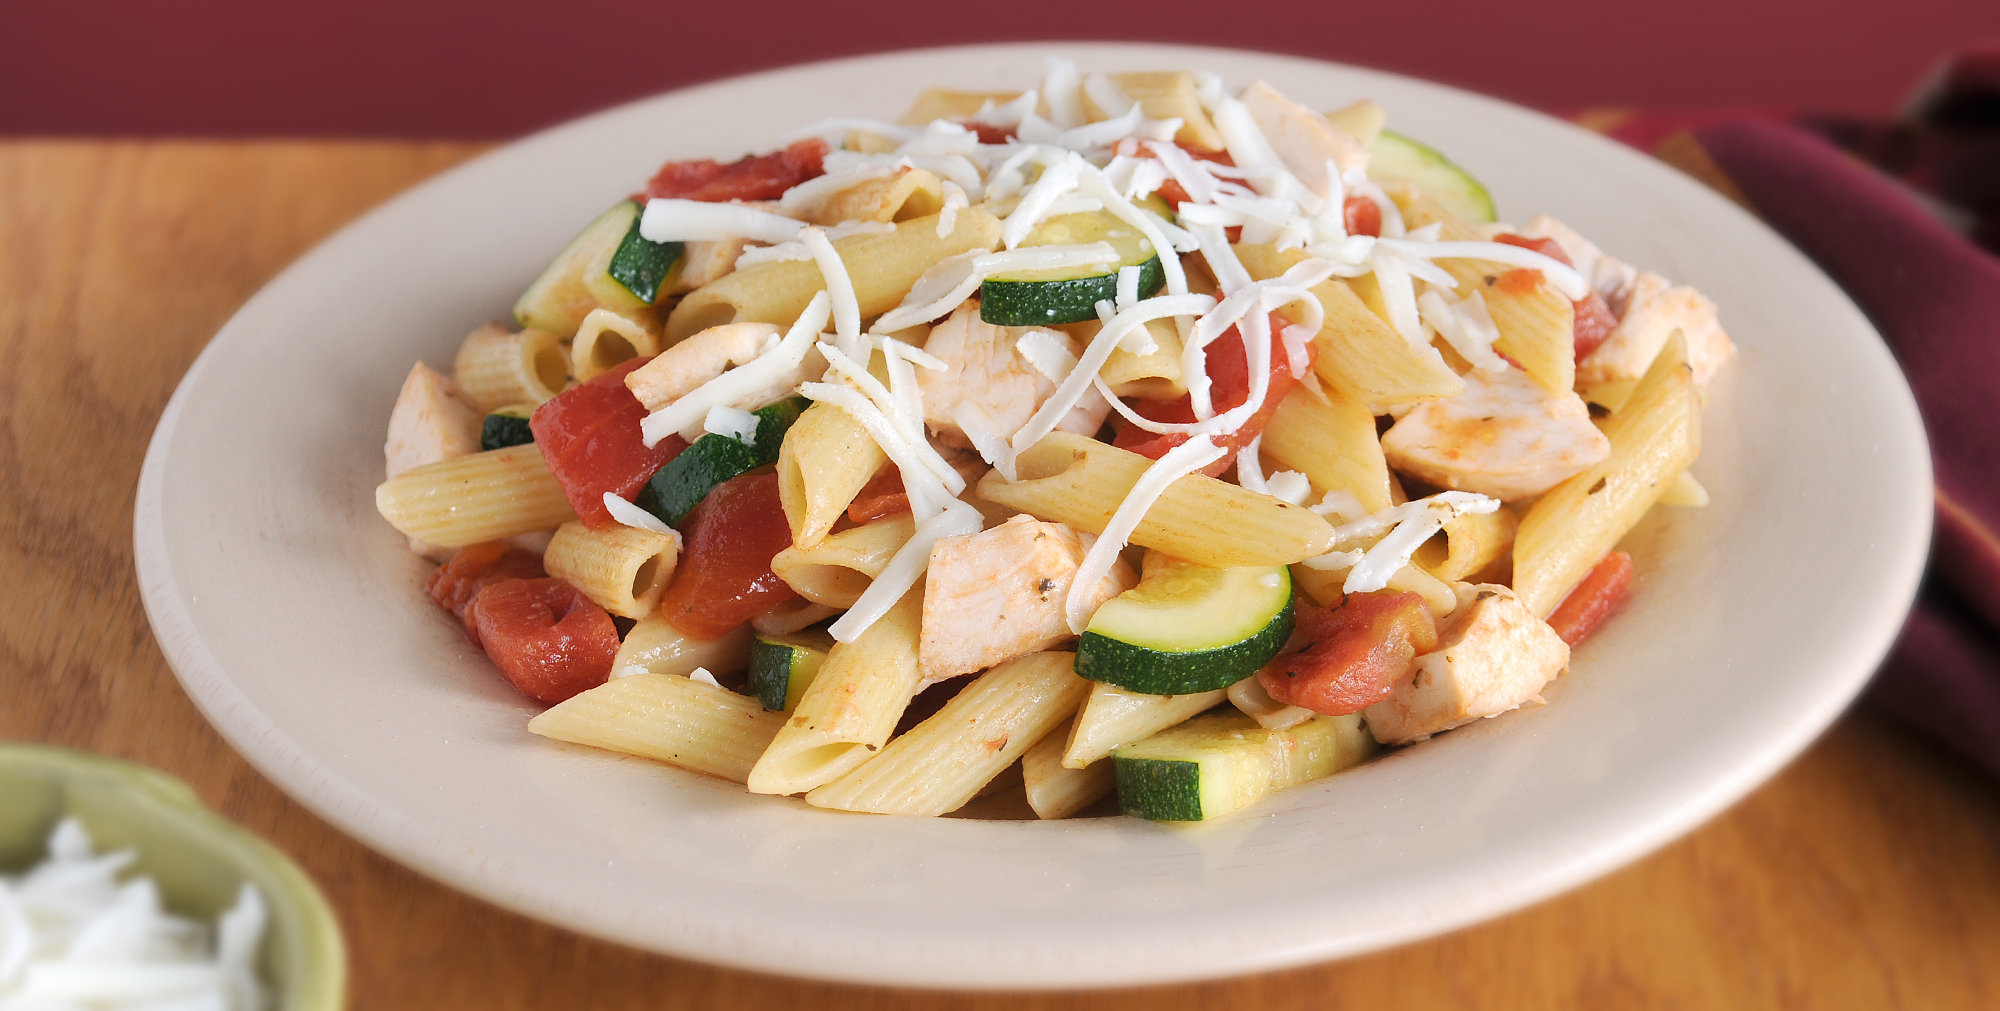 Penne pasta with zucchini, tomatoes, and chicken, topped with shredded cheese